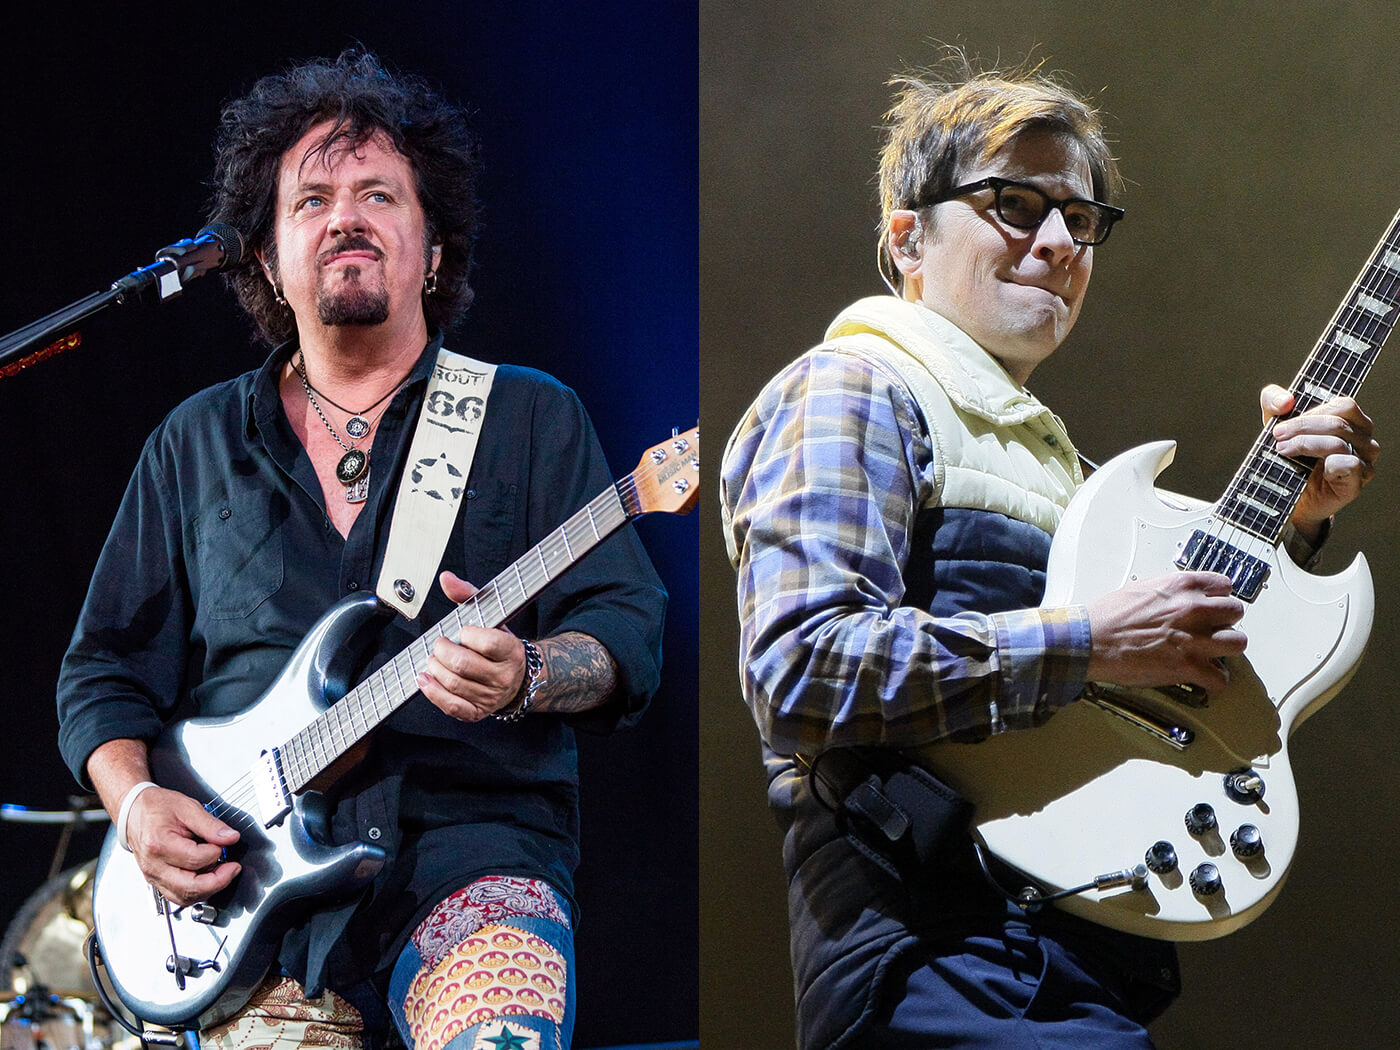 Steve Lukather wants Weezer's Rivers Cuomo to be “more thankful” for Toto's  Africa  | All Things Guitar